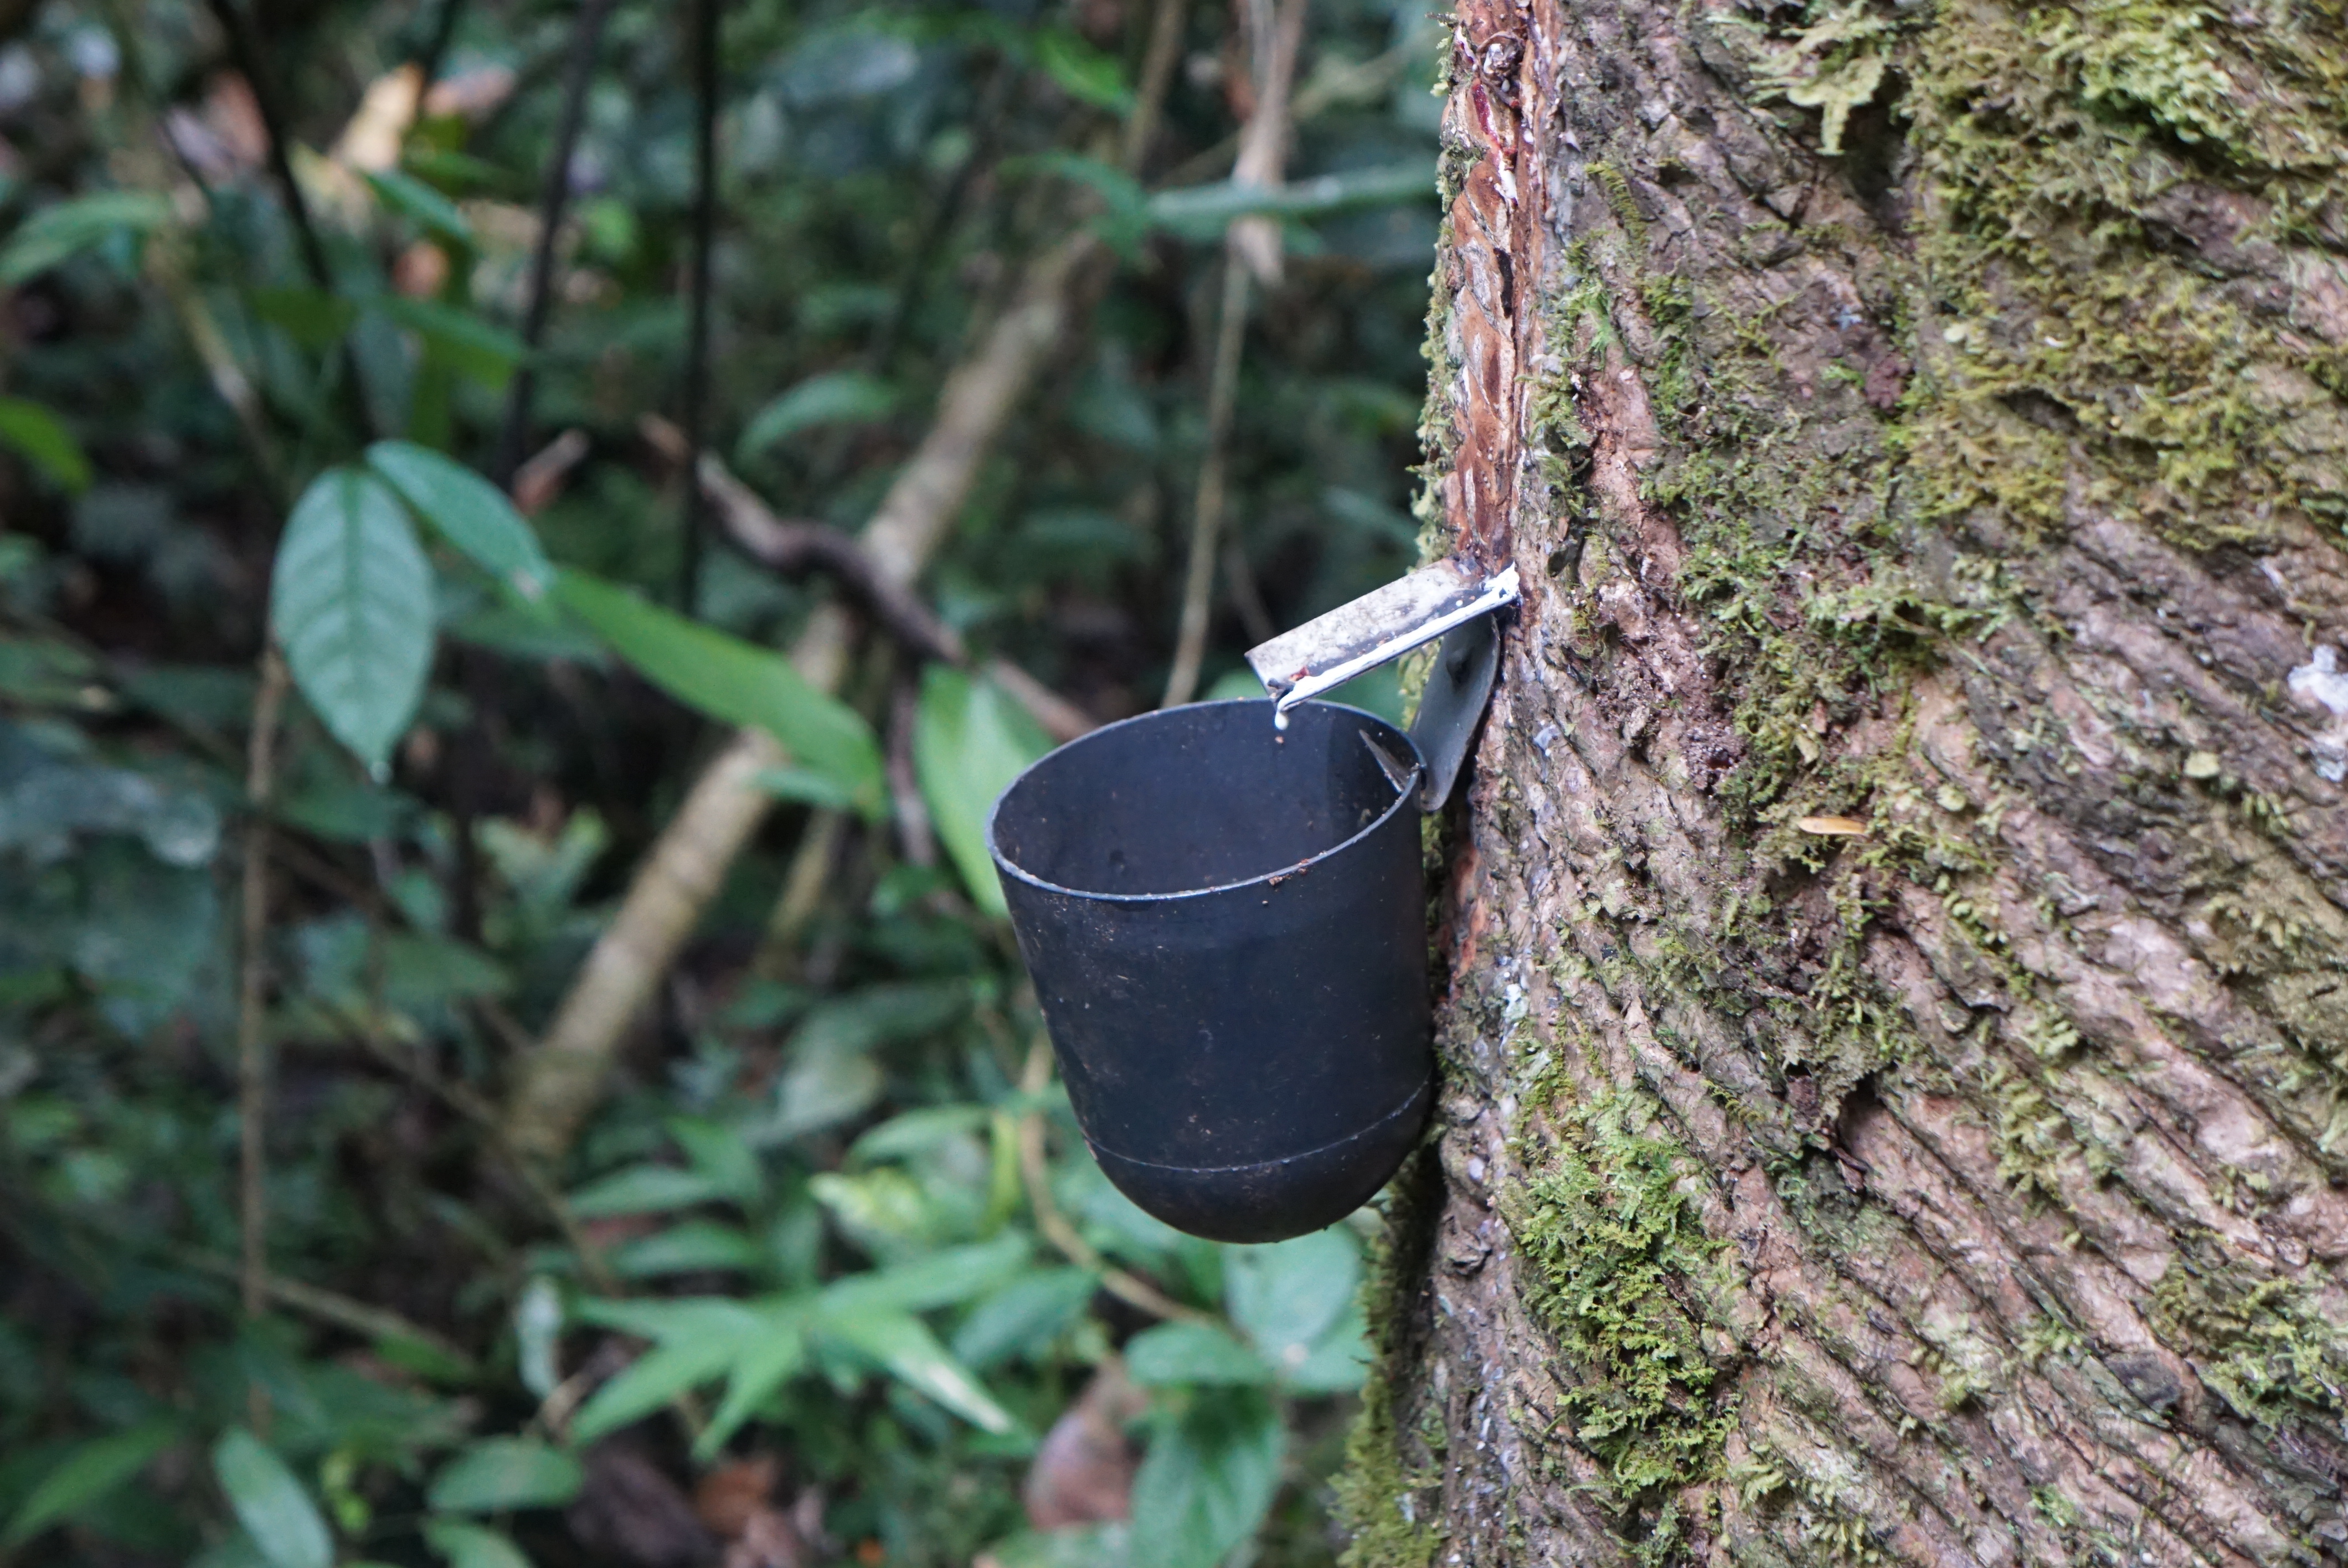 Liquid from a rubber tree dripping into a bucket.